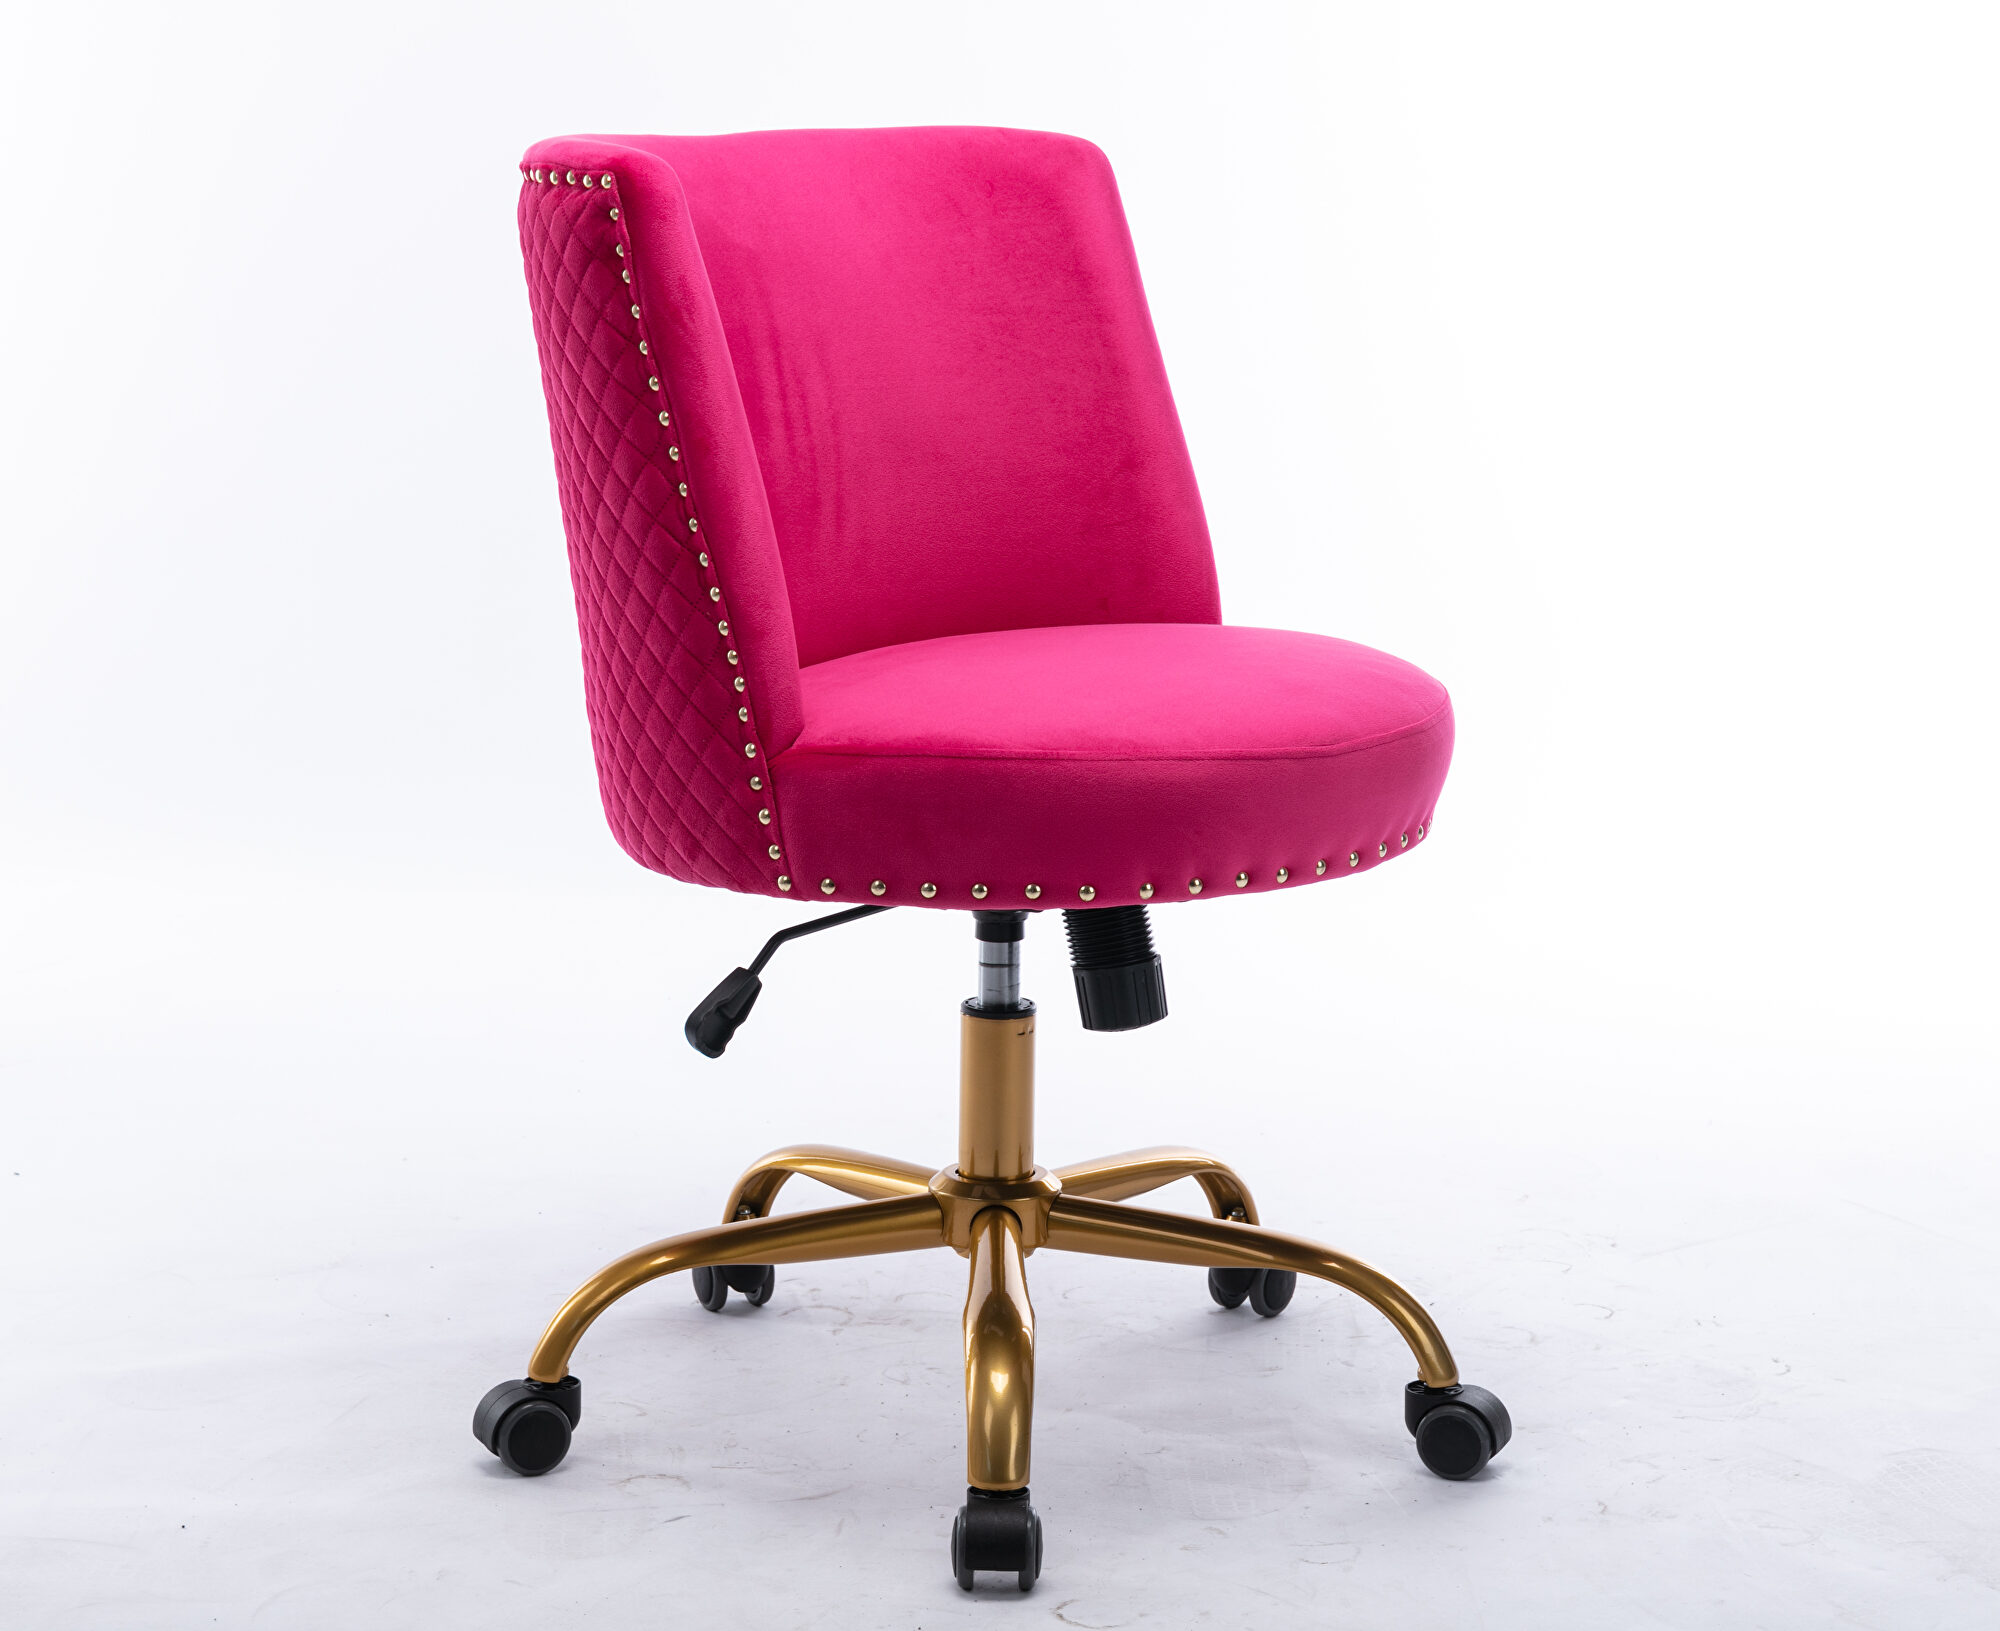 Dropship Pink Velvet Material. Home Computer Chair Office Chair